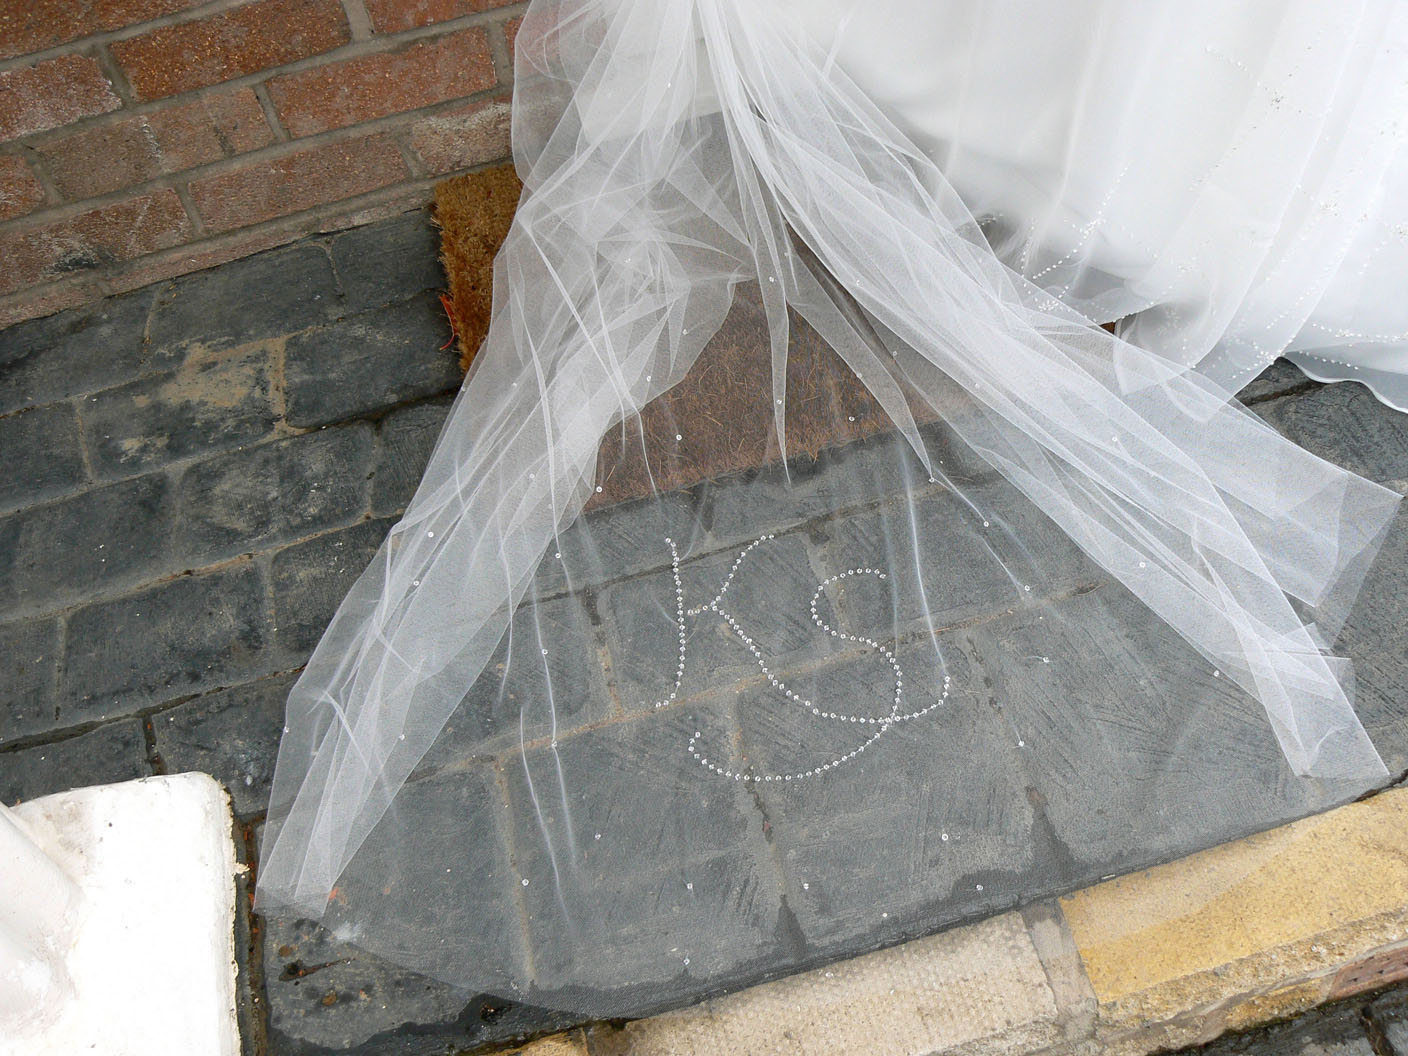 bespoke veil hand embroidered with crystal initials